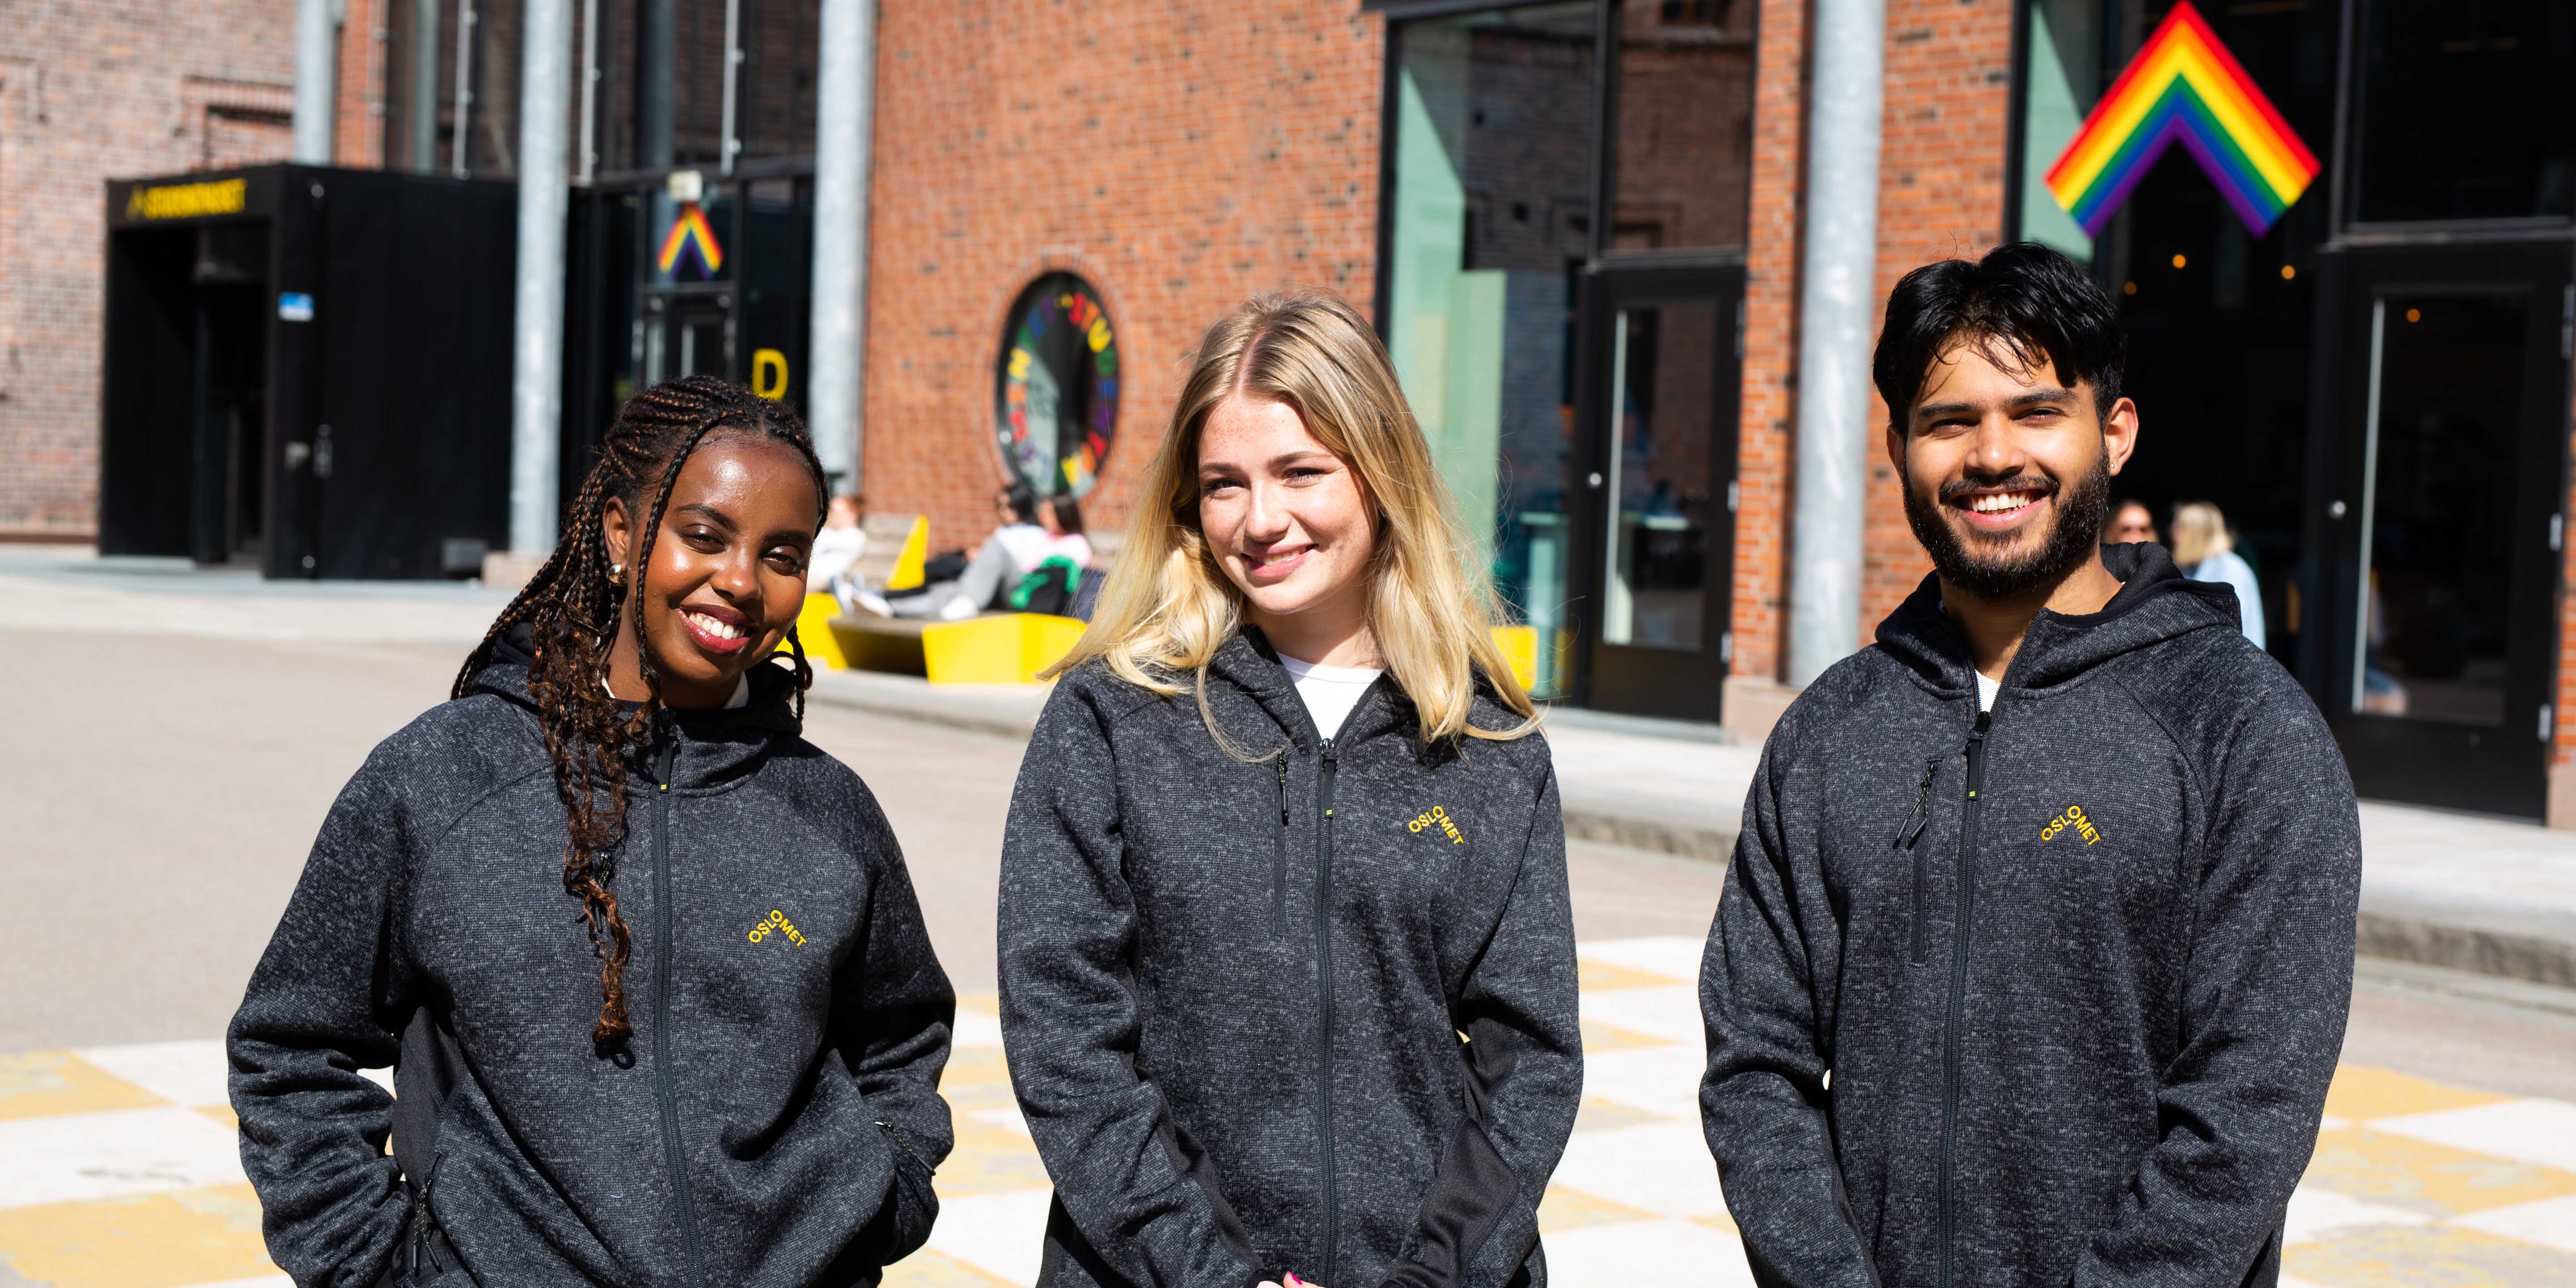 Three student wearing grey mottled fleece jackets. The jackets have a yellow OsloMet logo in front on the left side